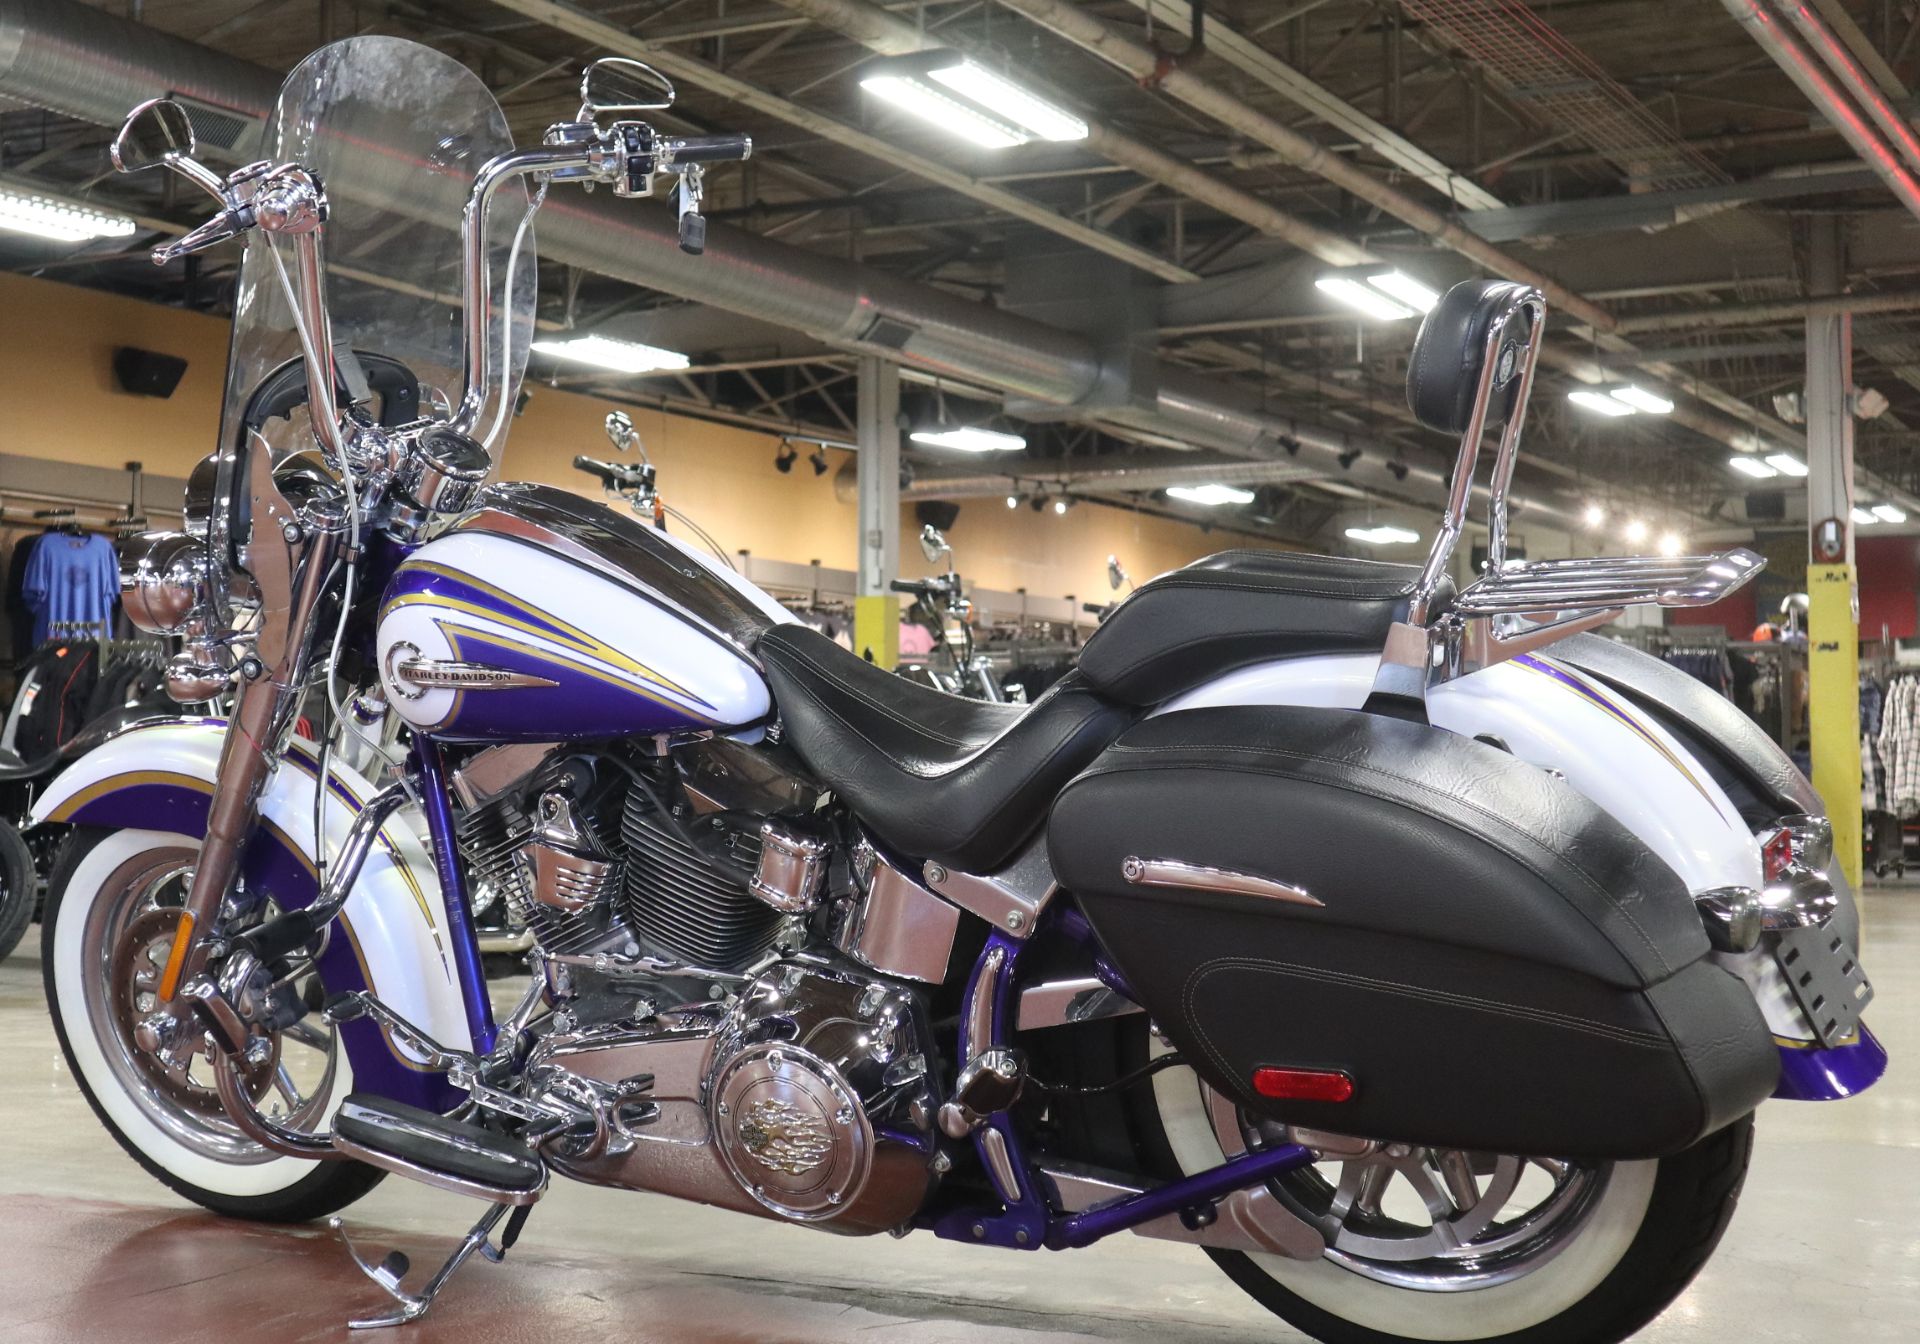 2014 Harley-Davidson CVO™ Softail® Deluxe in New London, Connecticut - Photo 6